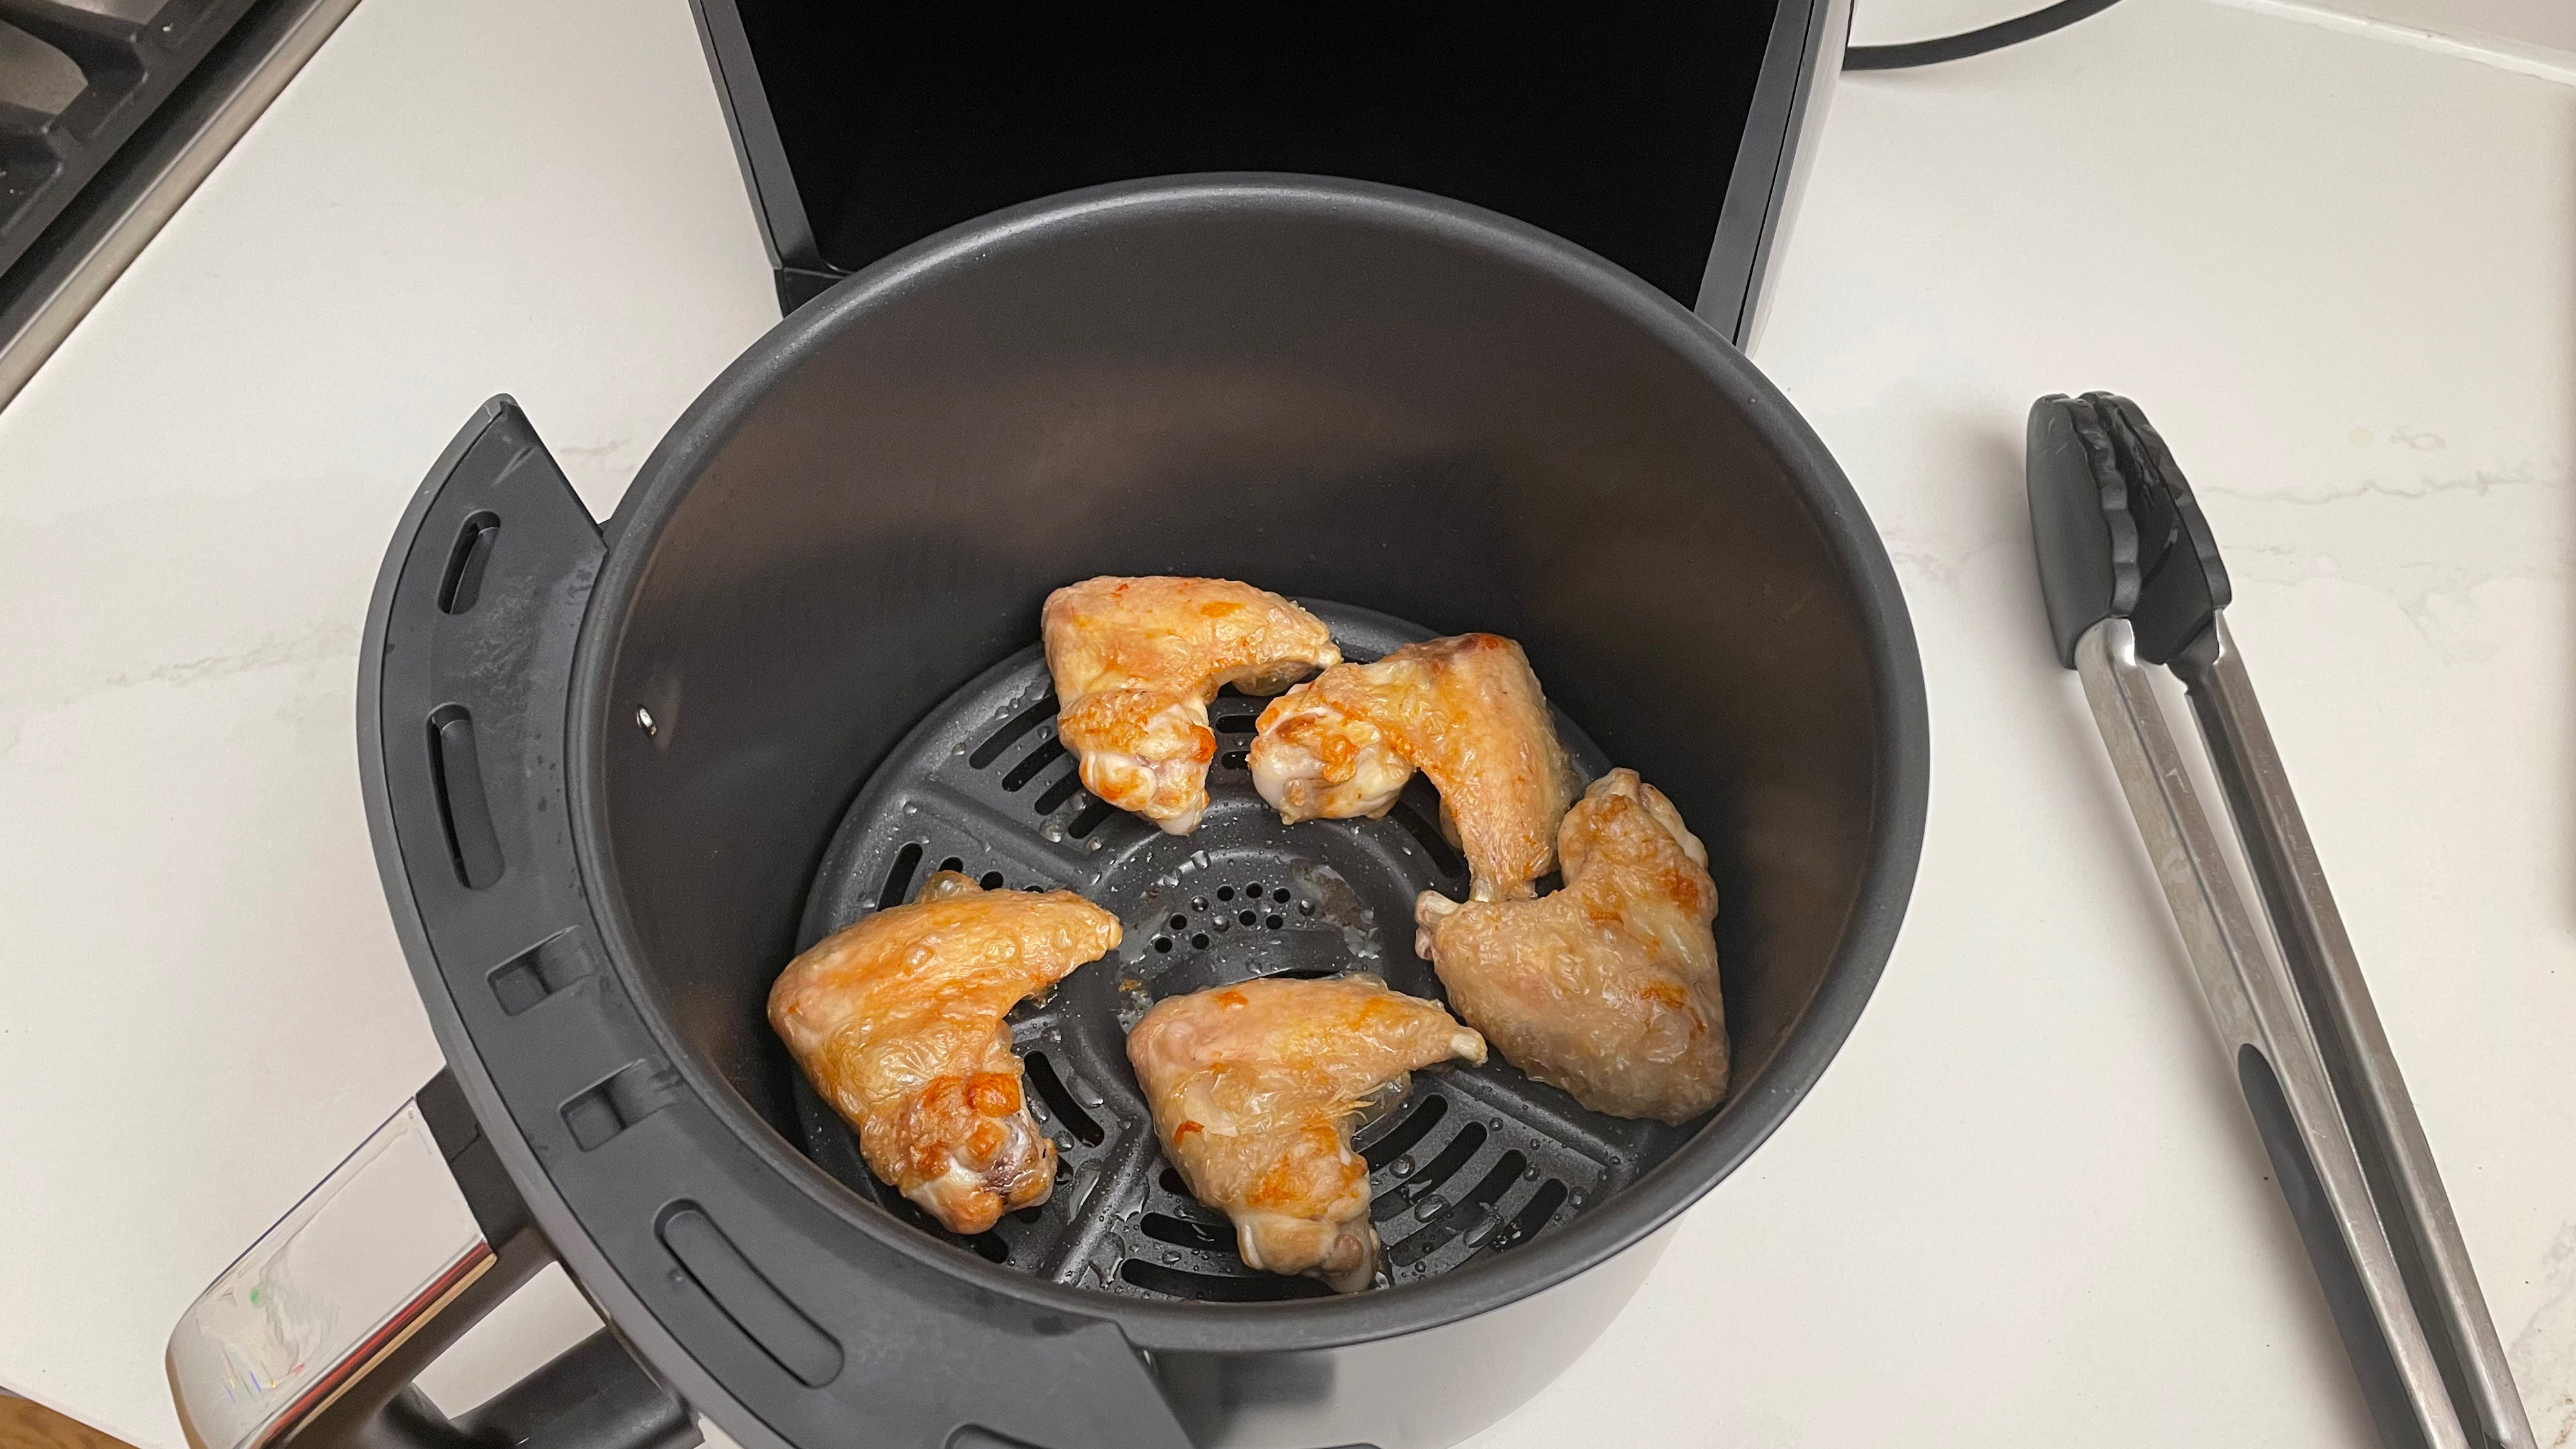 The Ninja Air Fryer Max AF160 with chicken wings that have just been cooked in it